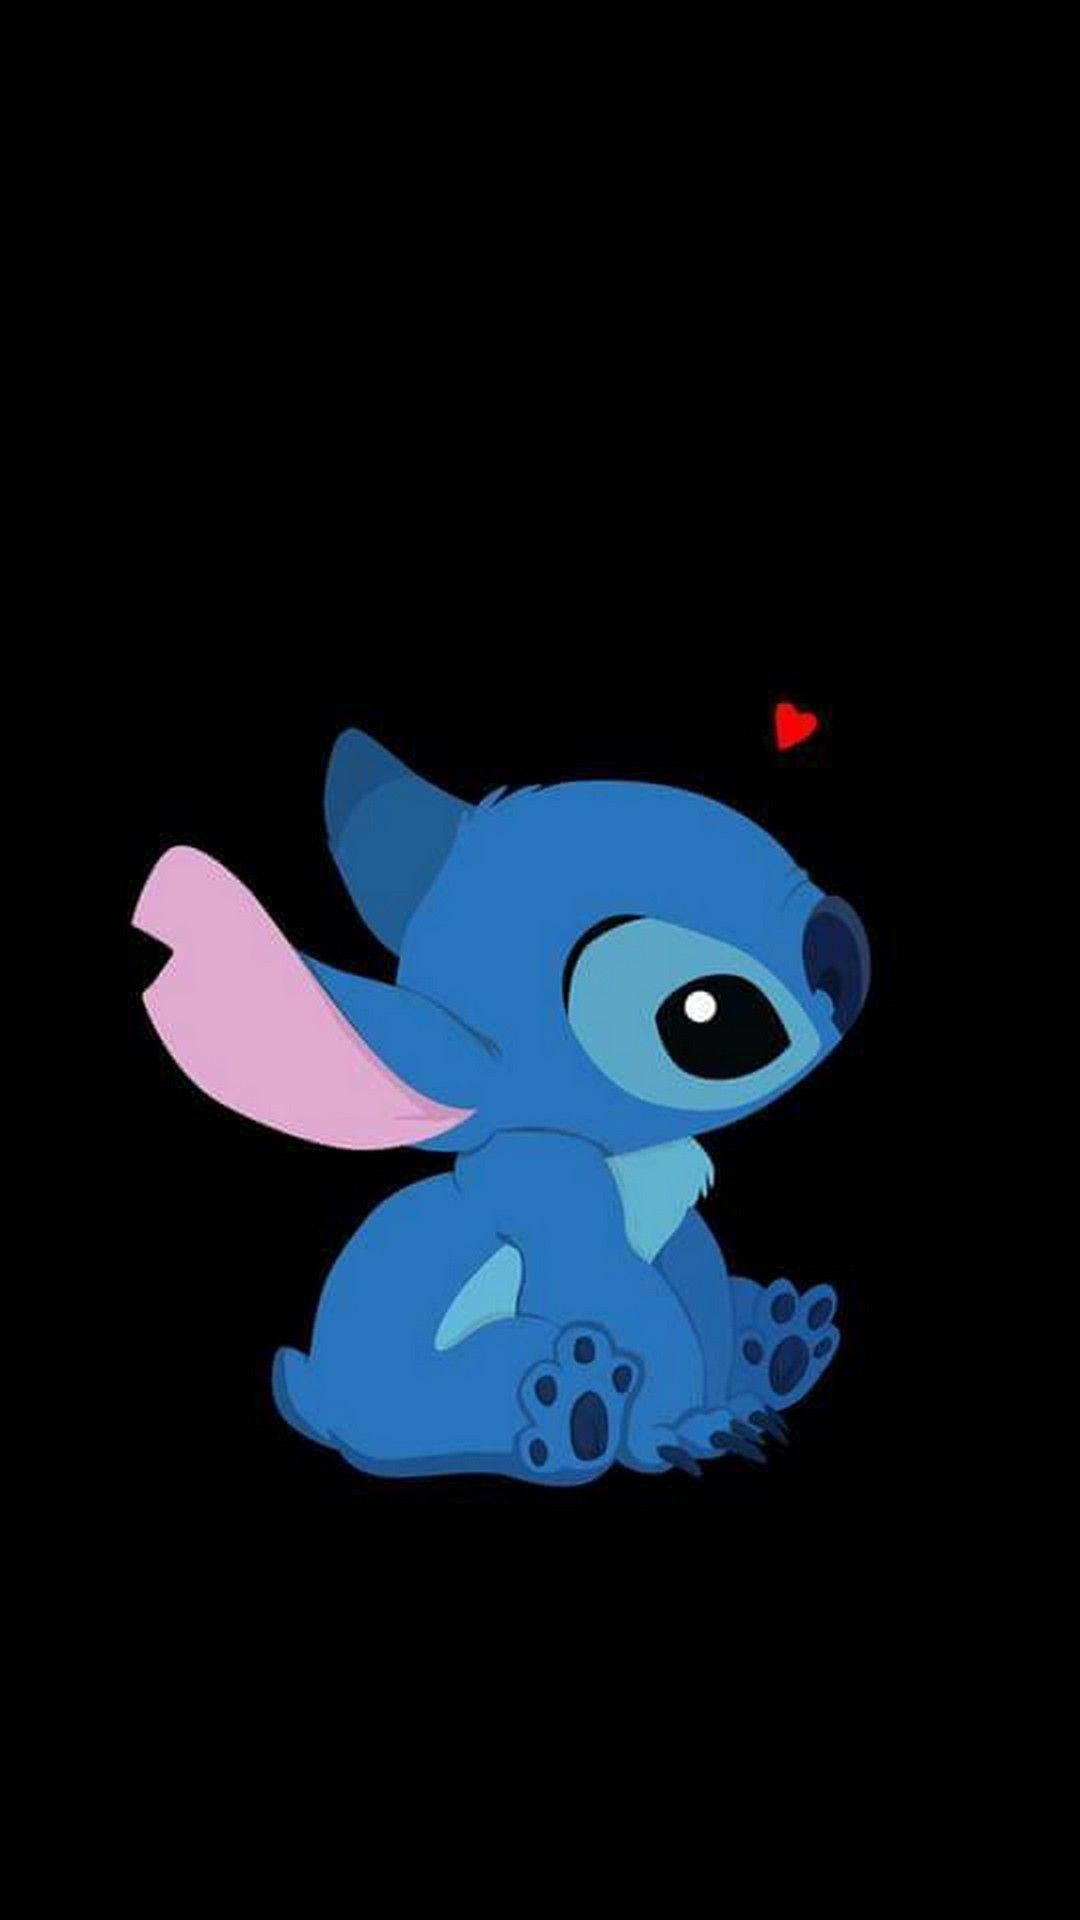 pic Aesthetic Lock Screen Background Stitch Wallpapers iphone cute lock scr...